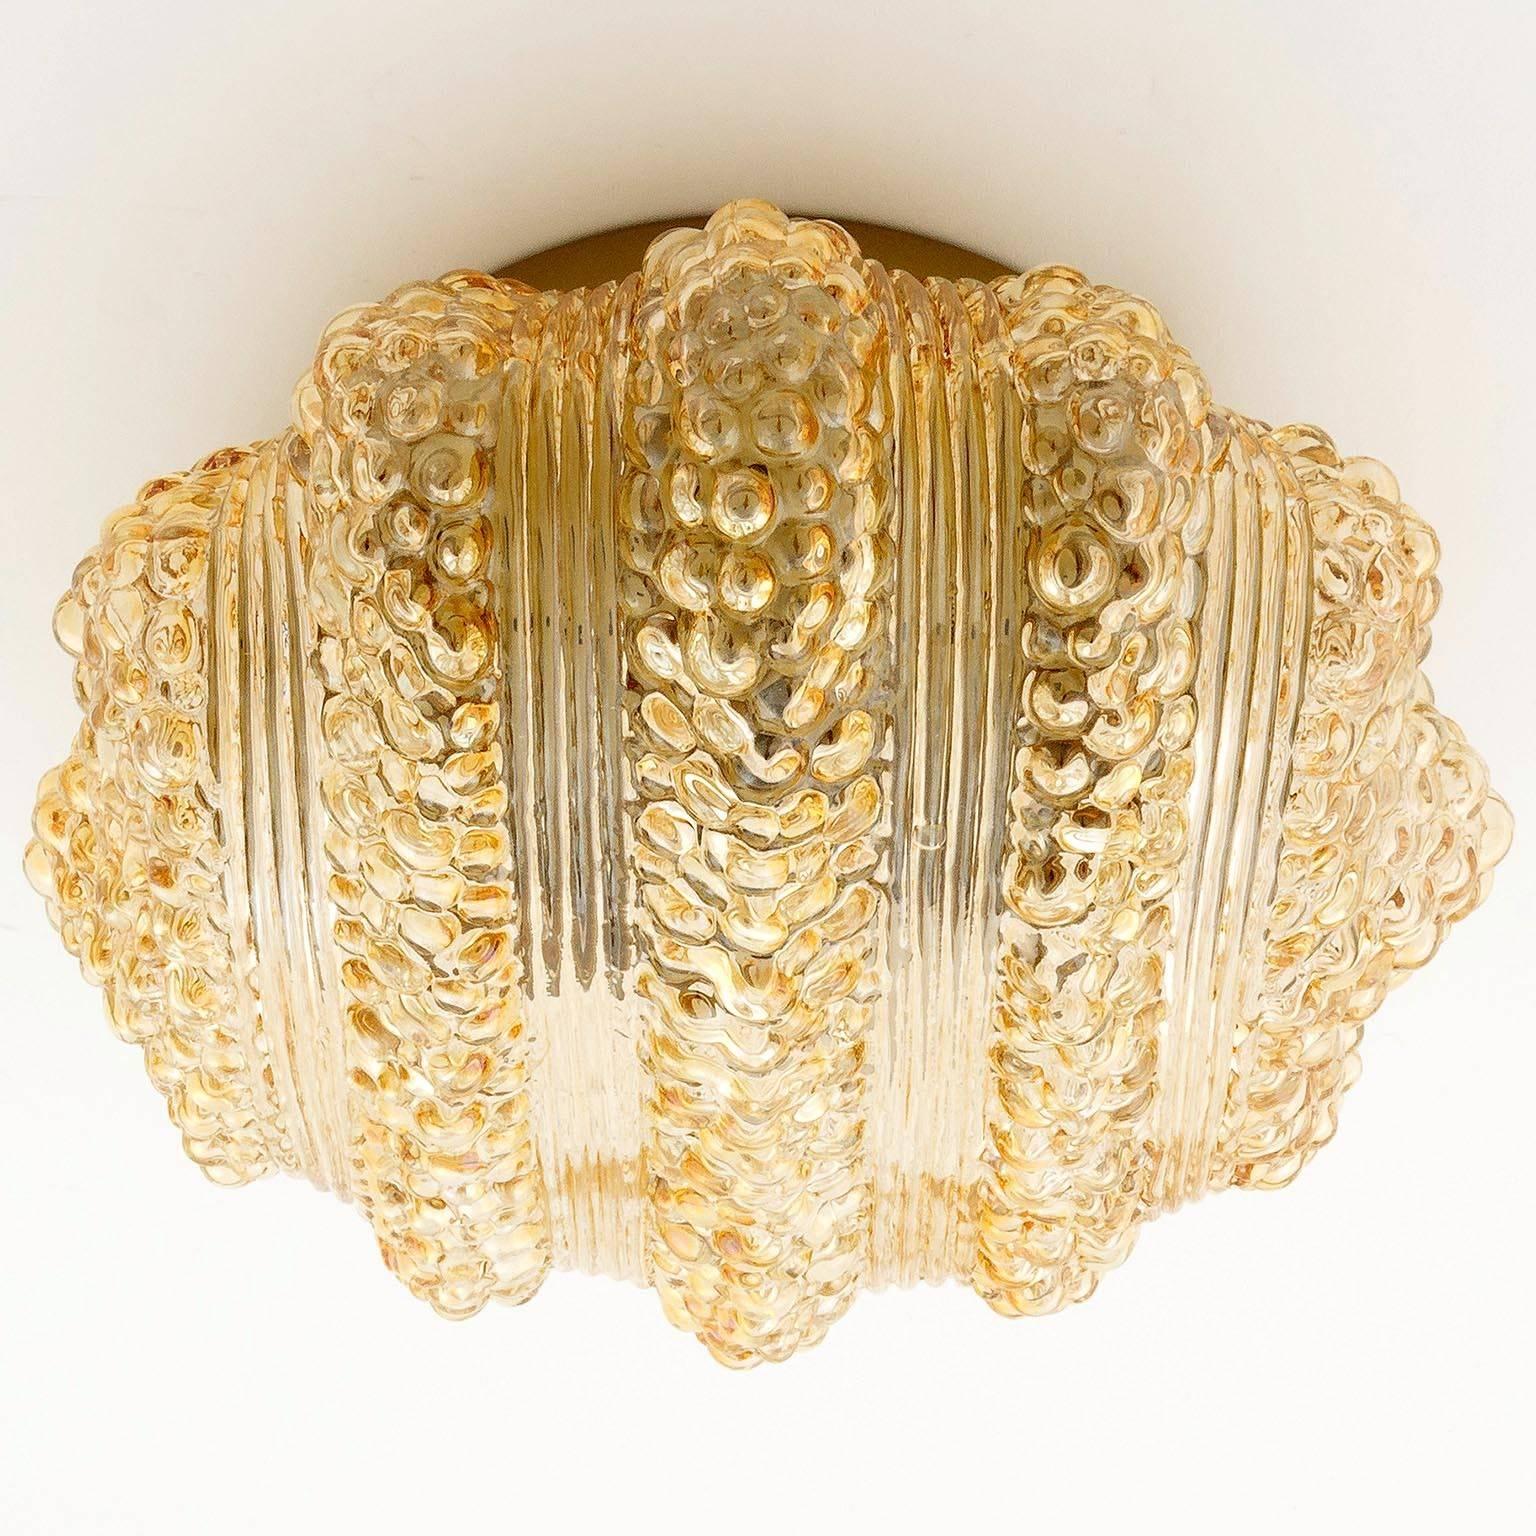 One of three fantastic textured glass light fixtures, manufactured in Germany in midcentury, circa 1970 (late 1960s or early 1970s).
An amber, yellow, orange, honey, champagne toned textured bubble glass is mounted on a golden or brass tone painted